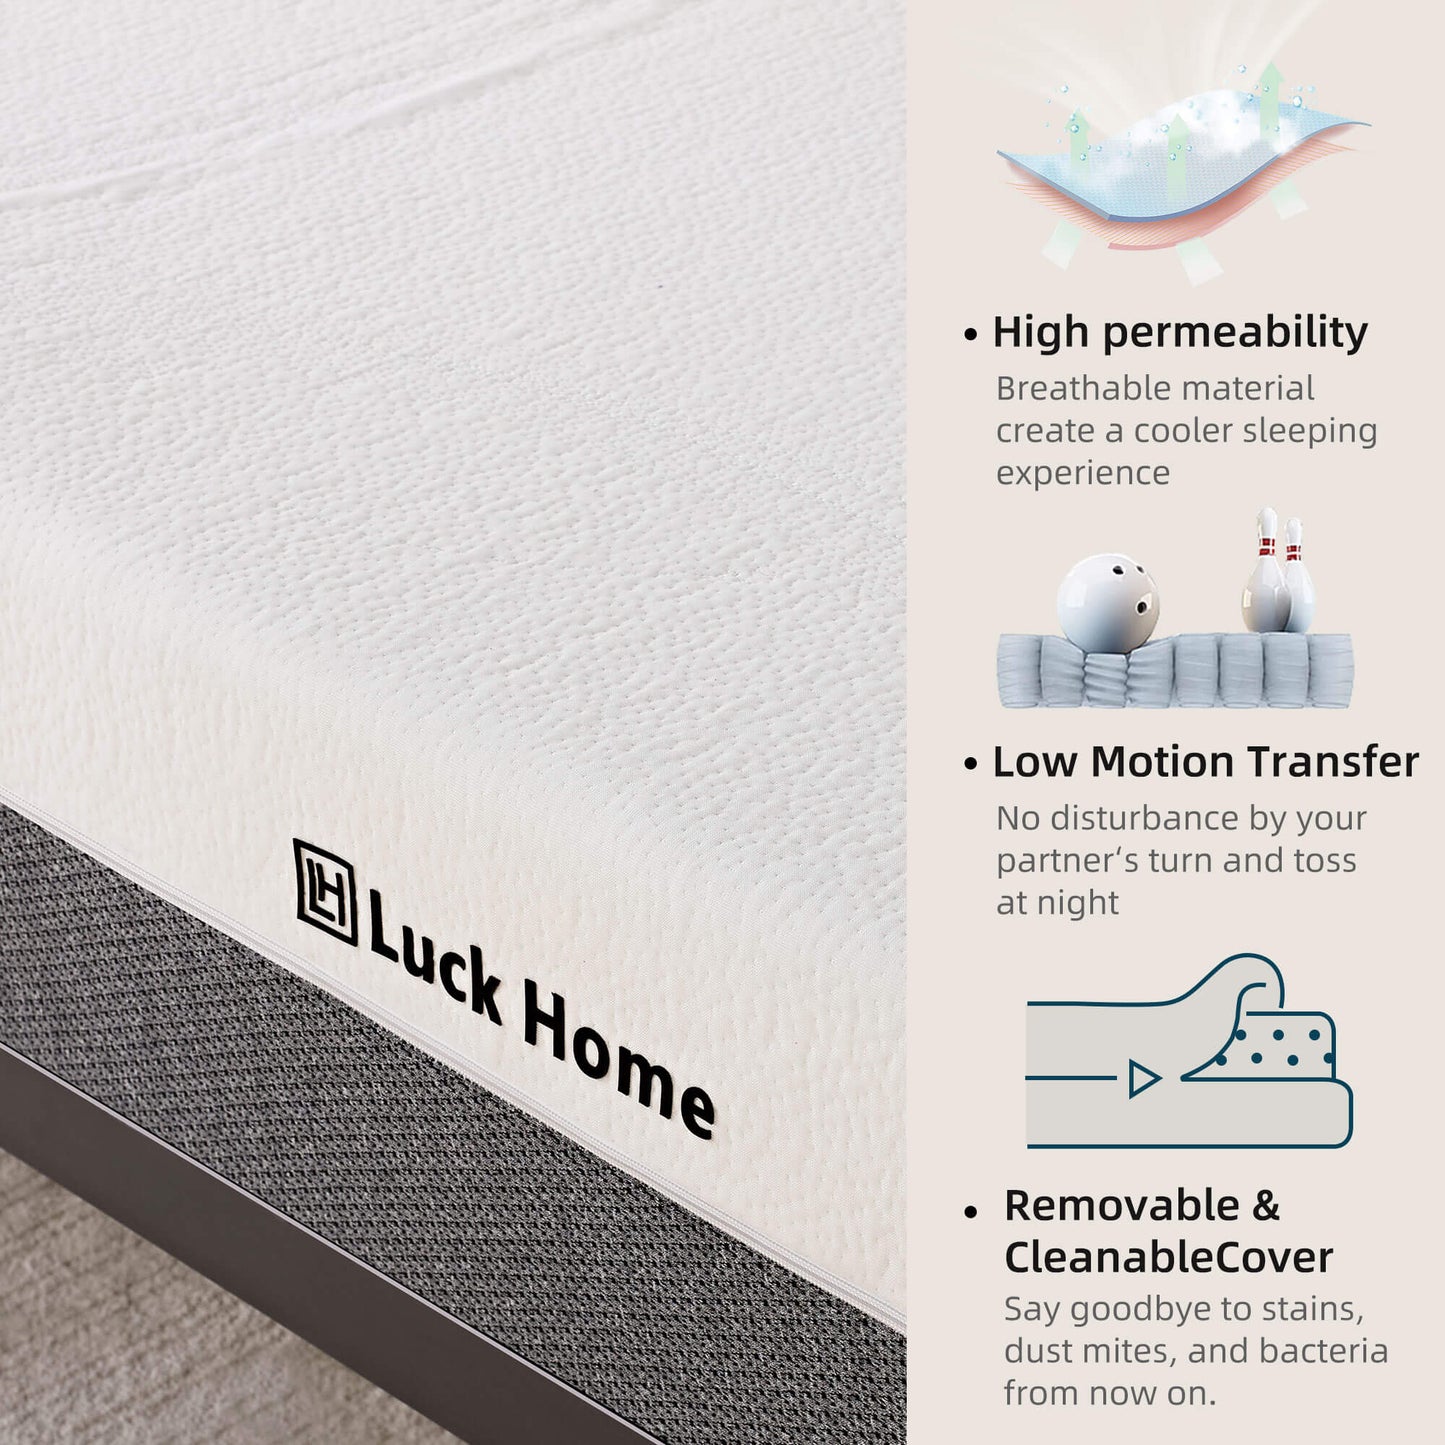 Premium Breathable Mattress with Advanced Motion Isolation In Full Size In Queen Size